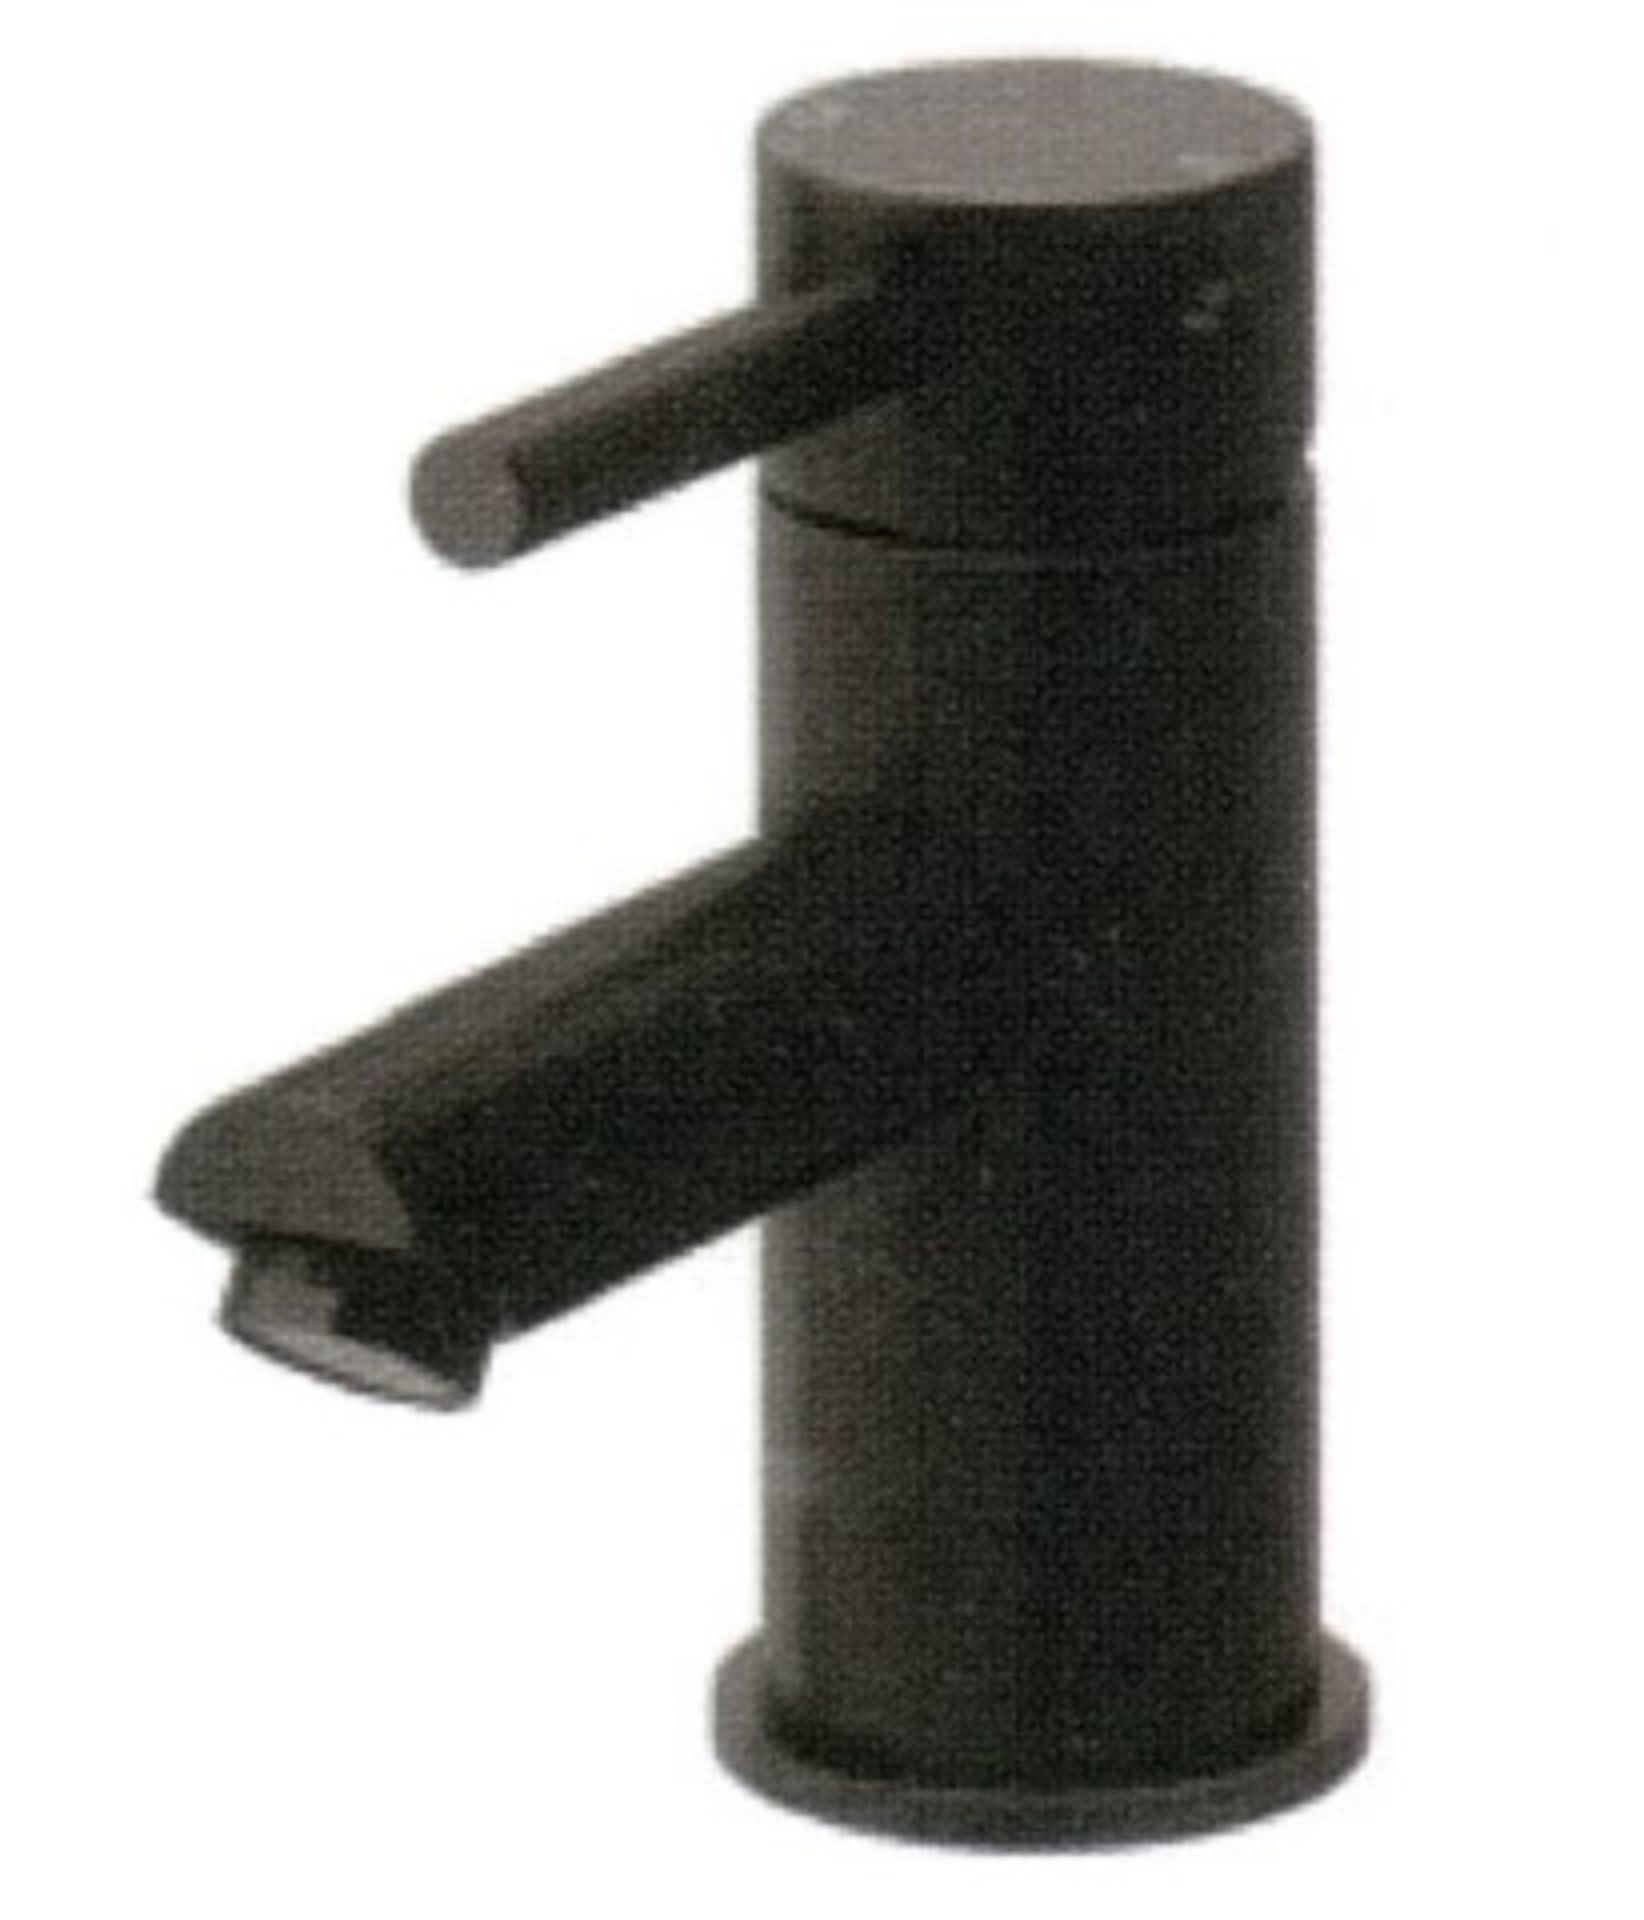 1 x Round Basin Mixer Tap With A Solid Brass Body Finished In Black - Brand New & Boxed - Ref: GAT1-